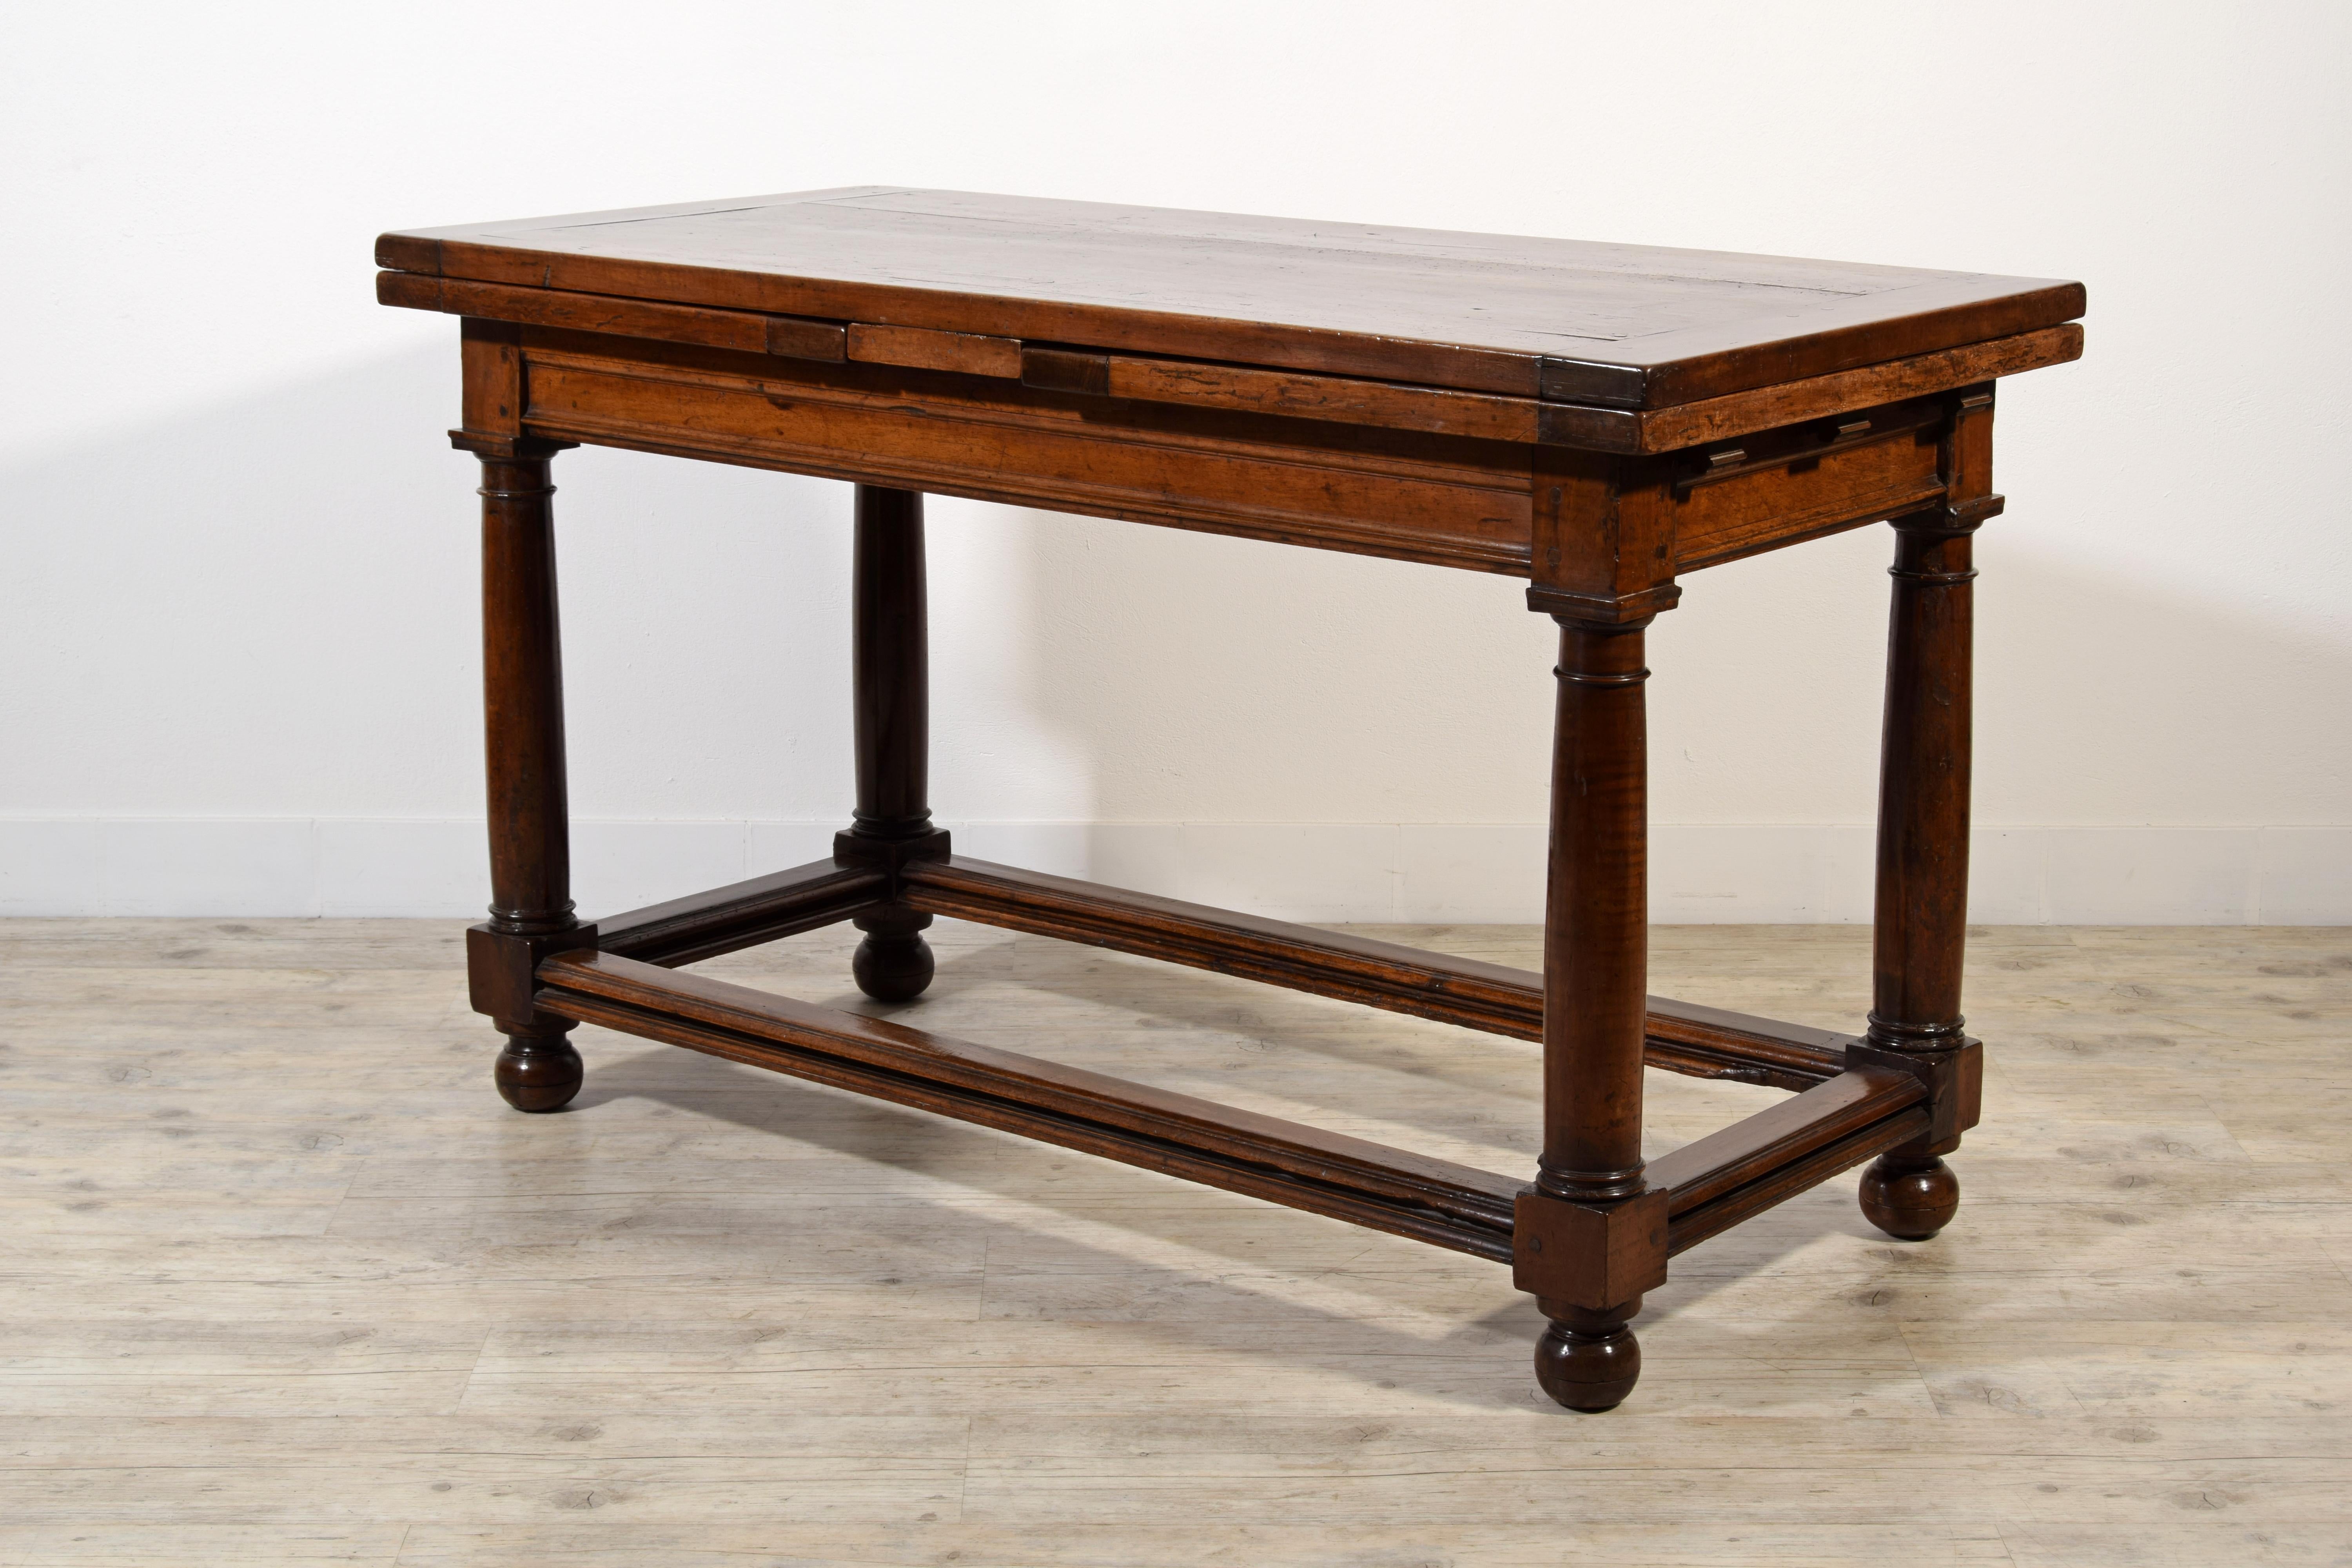 18TH Century, Italian Walnut Extendable Table
Measures: cm W 144 x D 71 x H 87.5. Open: cm W 267 x H 86.5 x D 71

This solid walnut table was made in the Tuscan area, Italy, in the early 18th century.
Its peculiarity is due to the possibility of